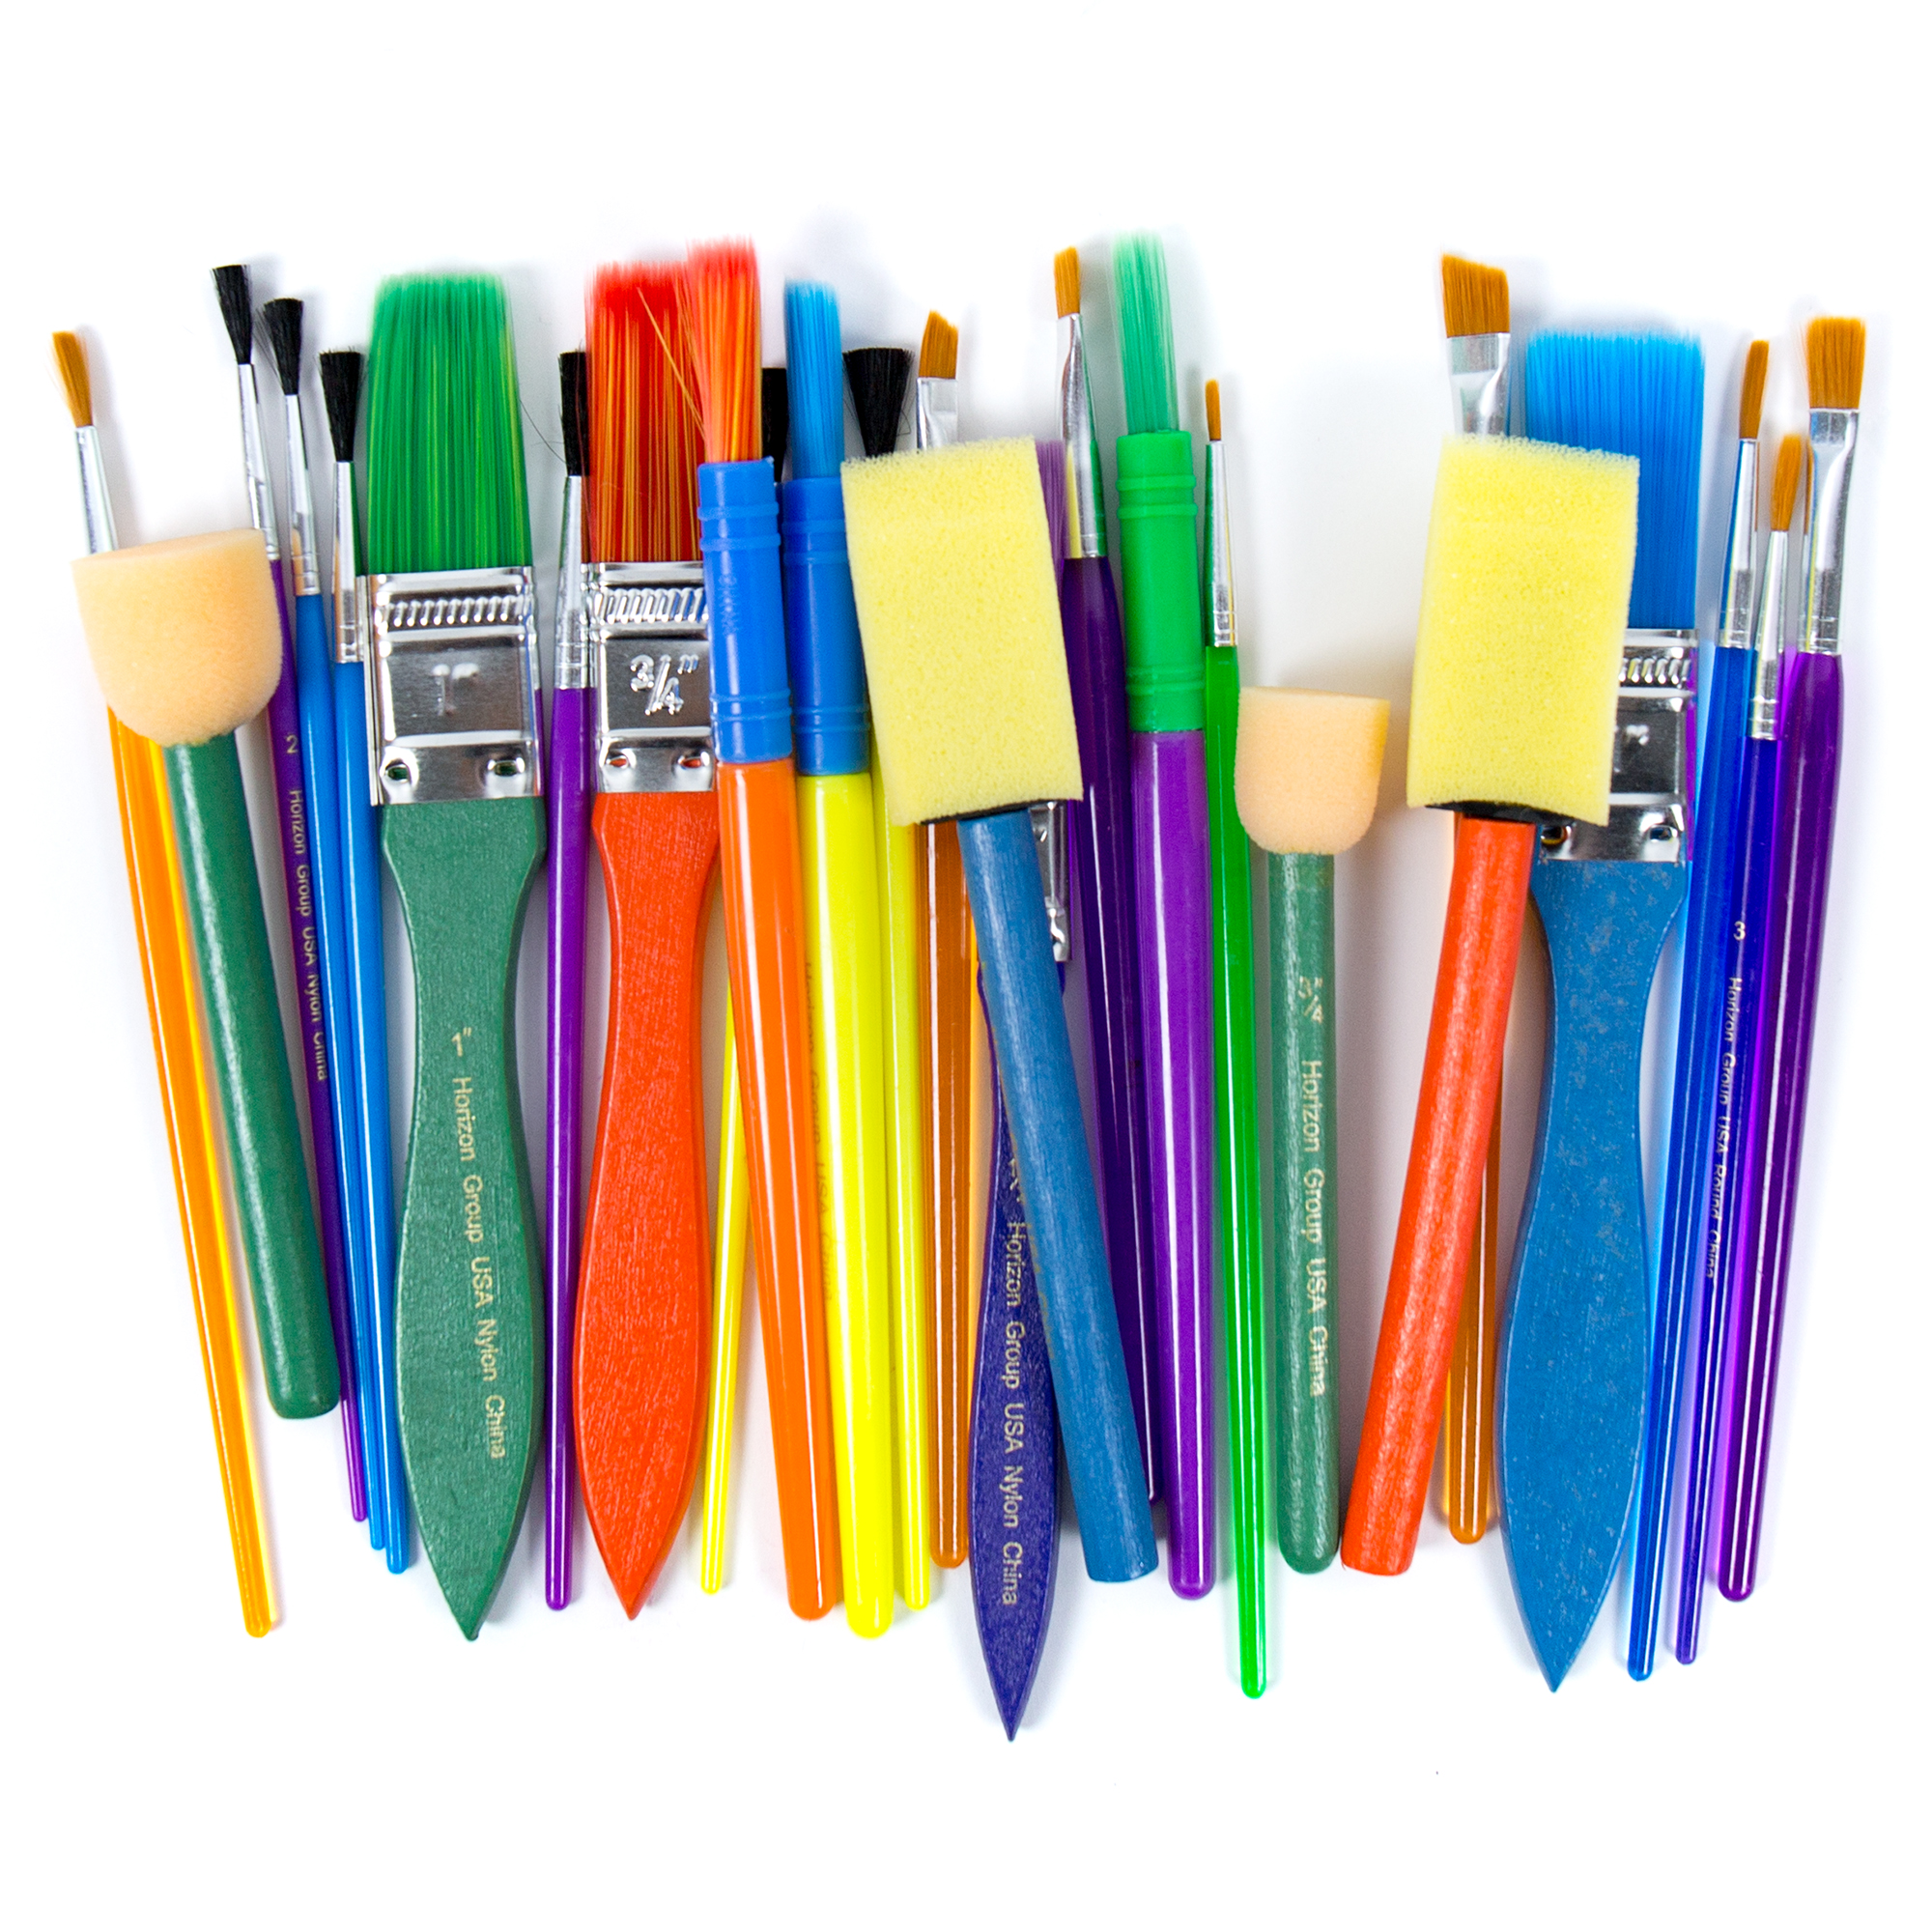 Go Create Assorted Paint Brushes, 25 ct. - image 2 of 5